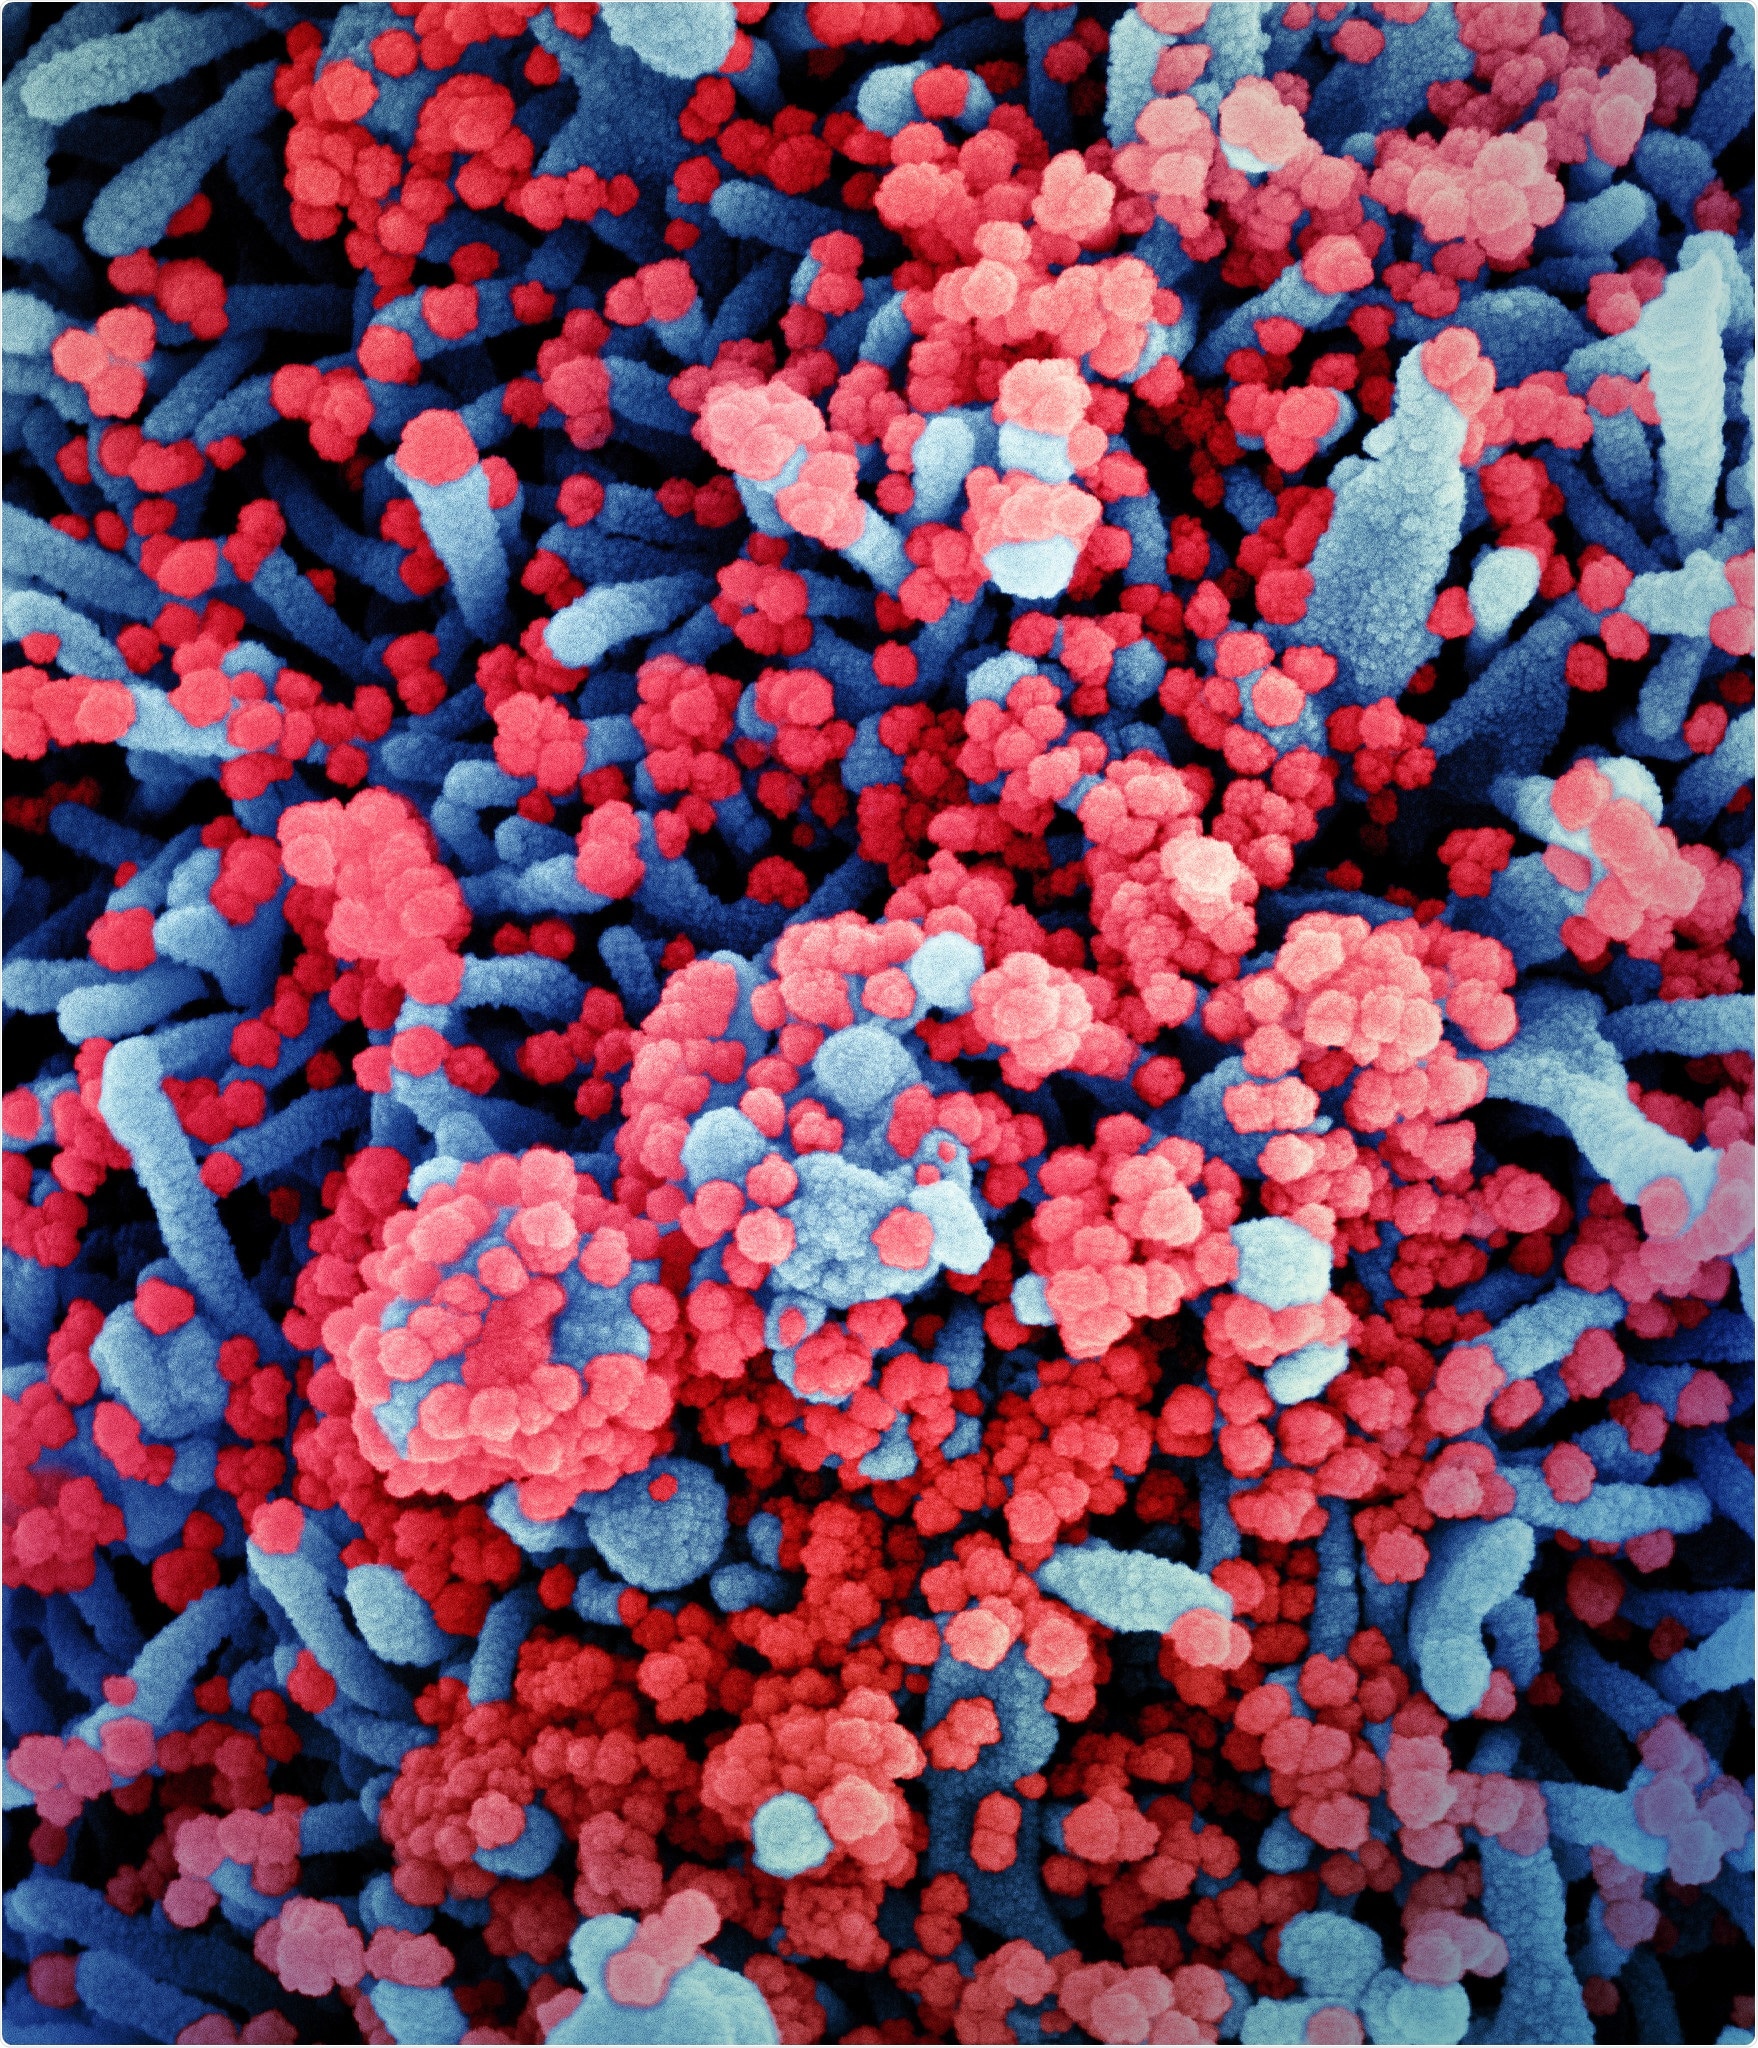 Colorized scanning electron micrograph of a cell (blue) heavily infected with SARS-CoV-2 virus particles (red), isolated from a patient sample. Image captured at the NIAID Integrated Research Facility (IRF) in Fort Detrick, Maryland. Credit: NIAID